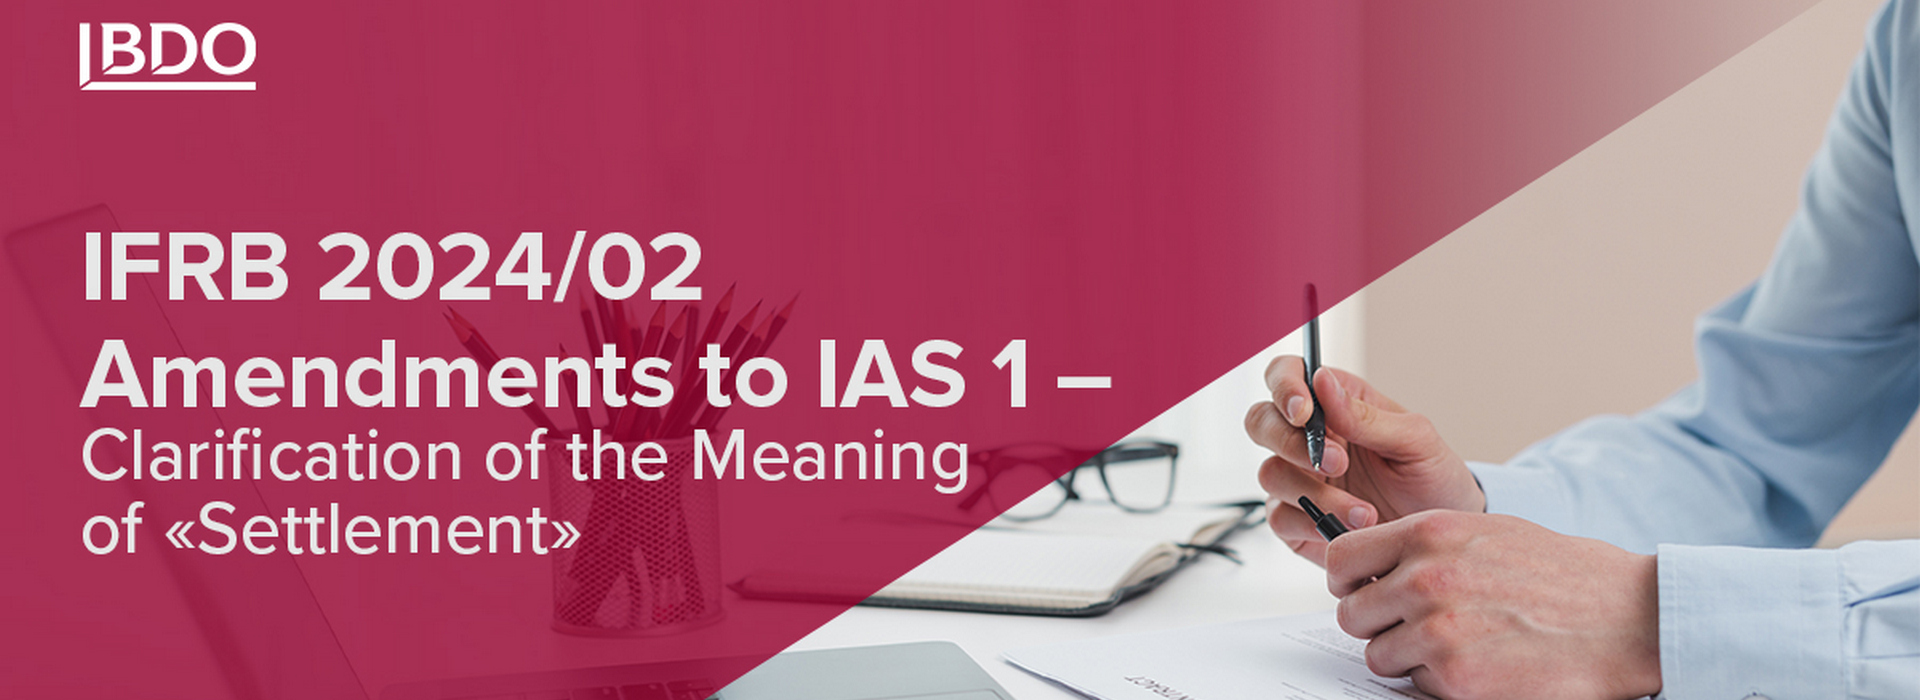 IFRB 2024/02 Amendments to IAS 1 – Clarification of the Meaning of “Settlement”